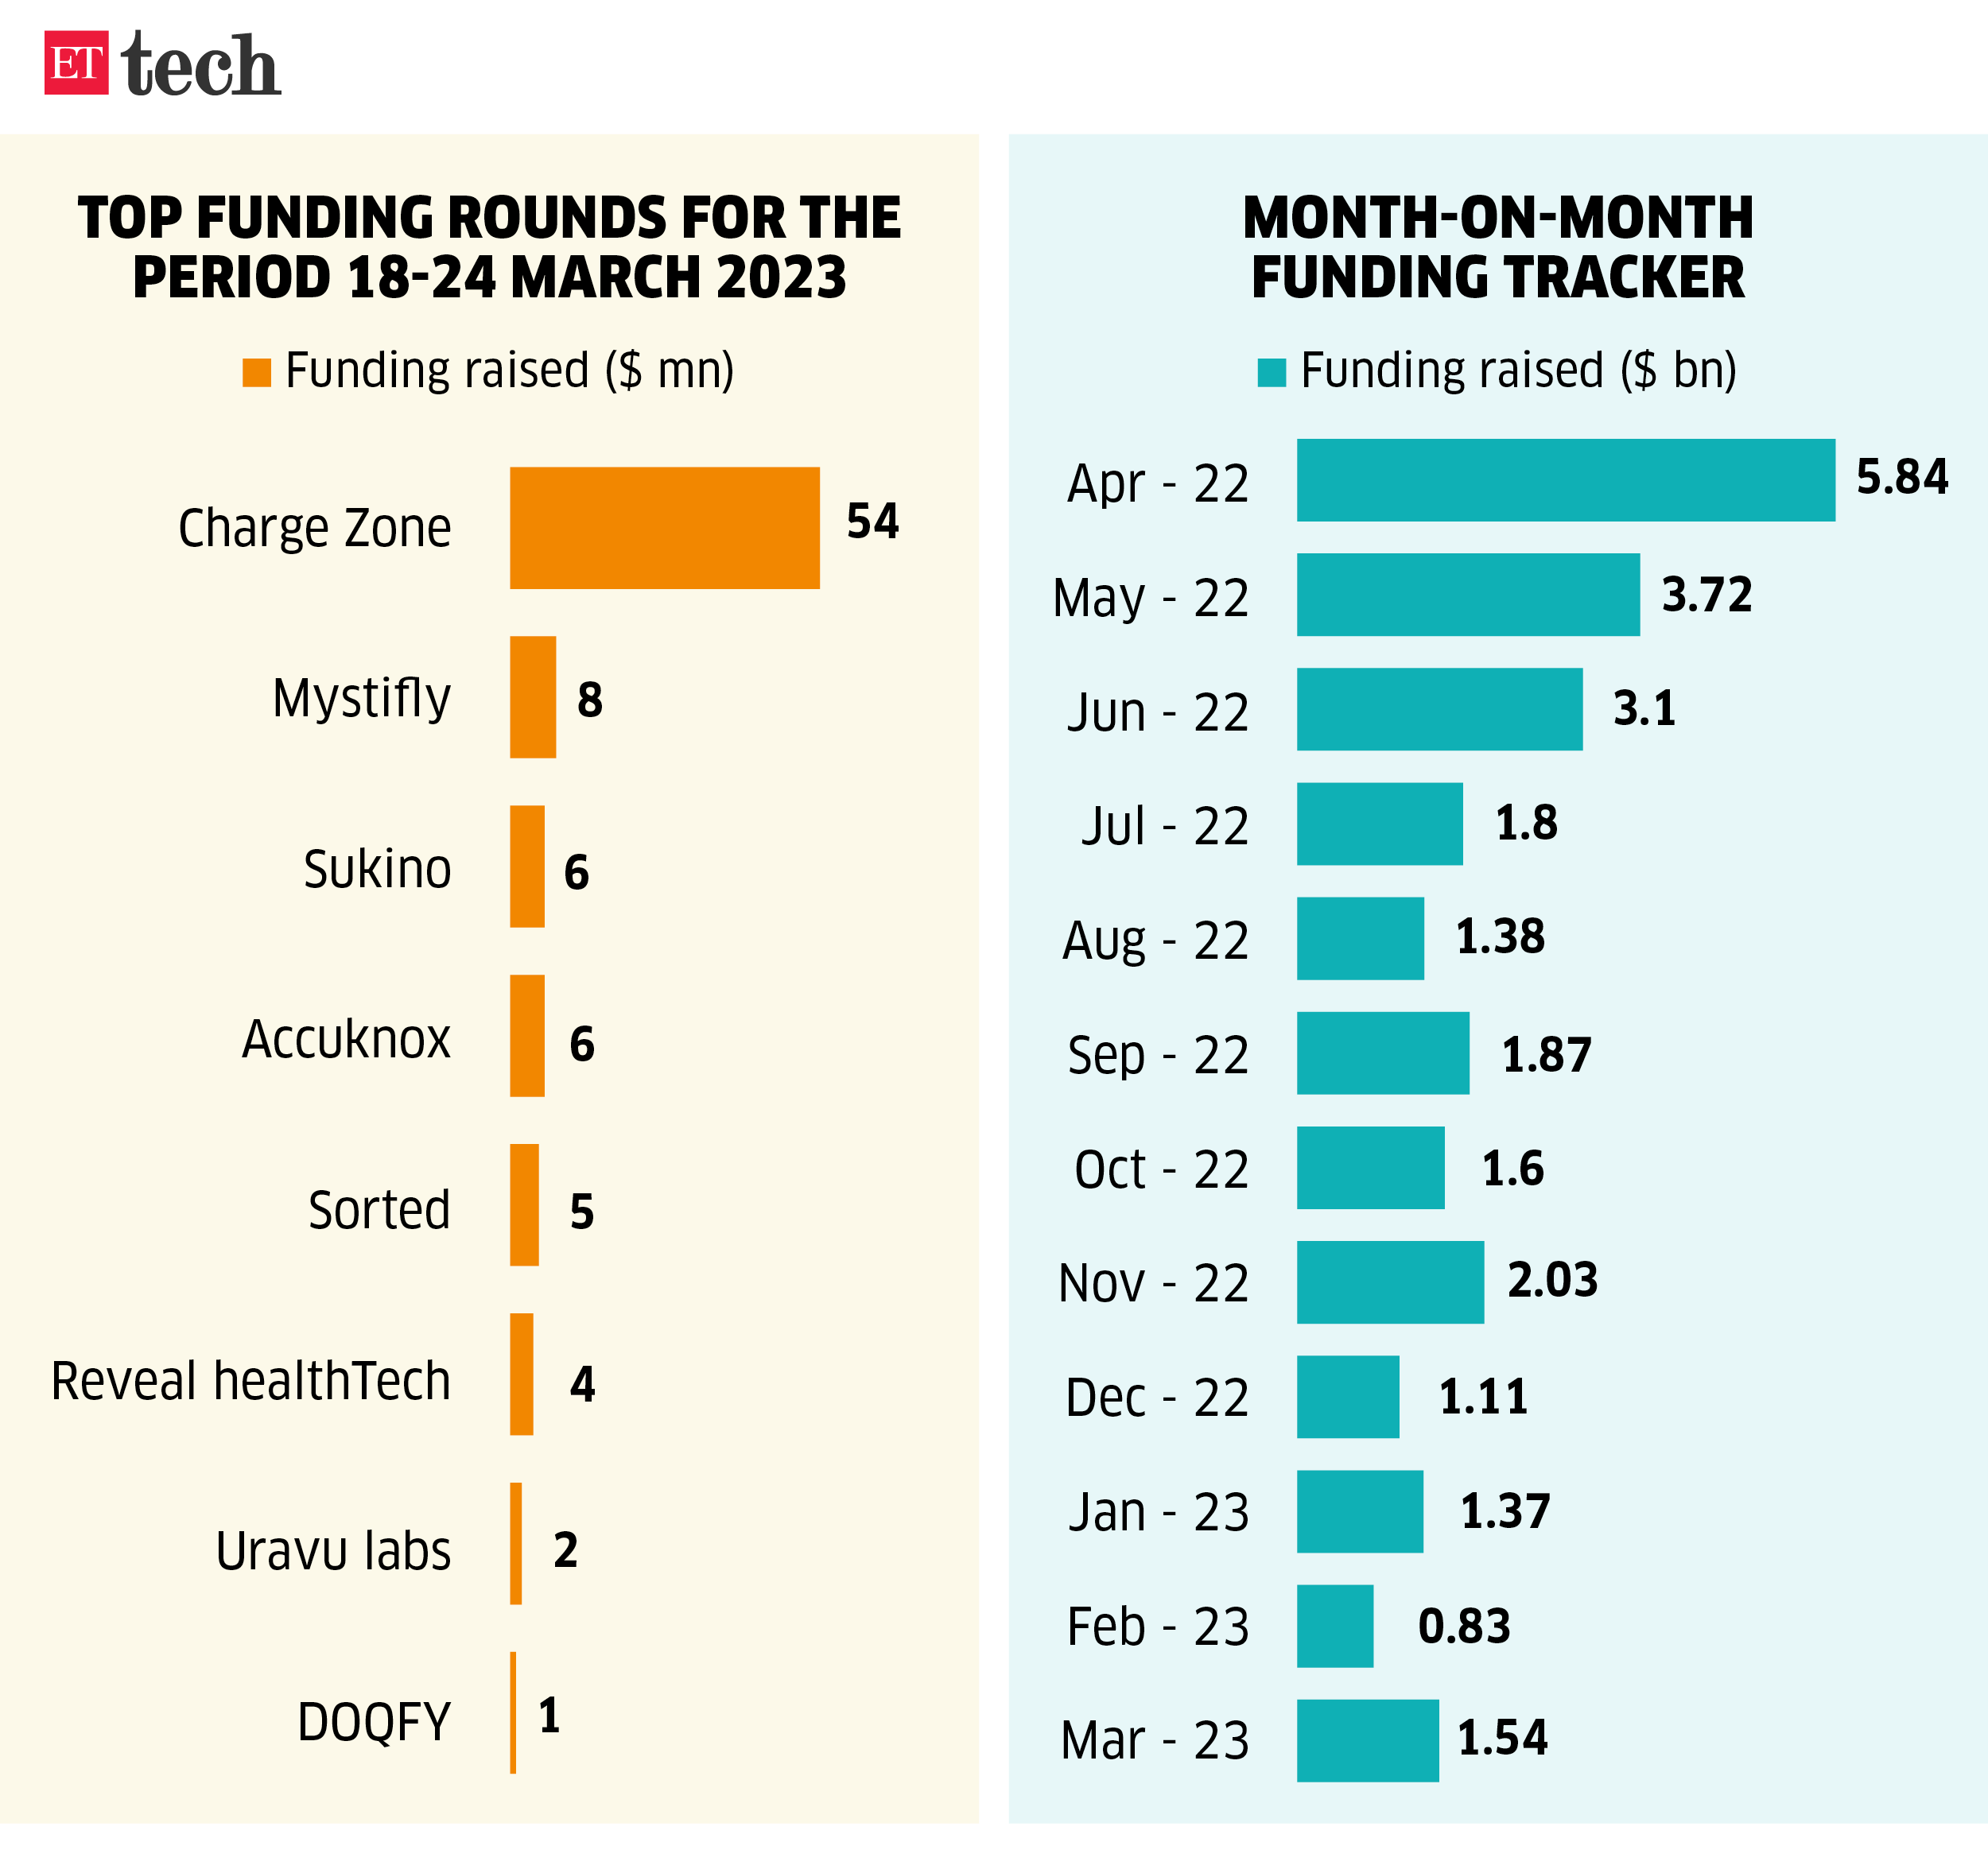 Top funding rounds for the period